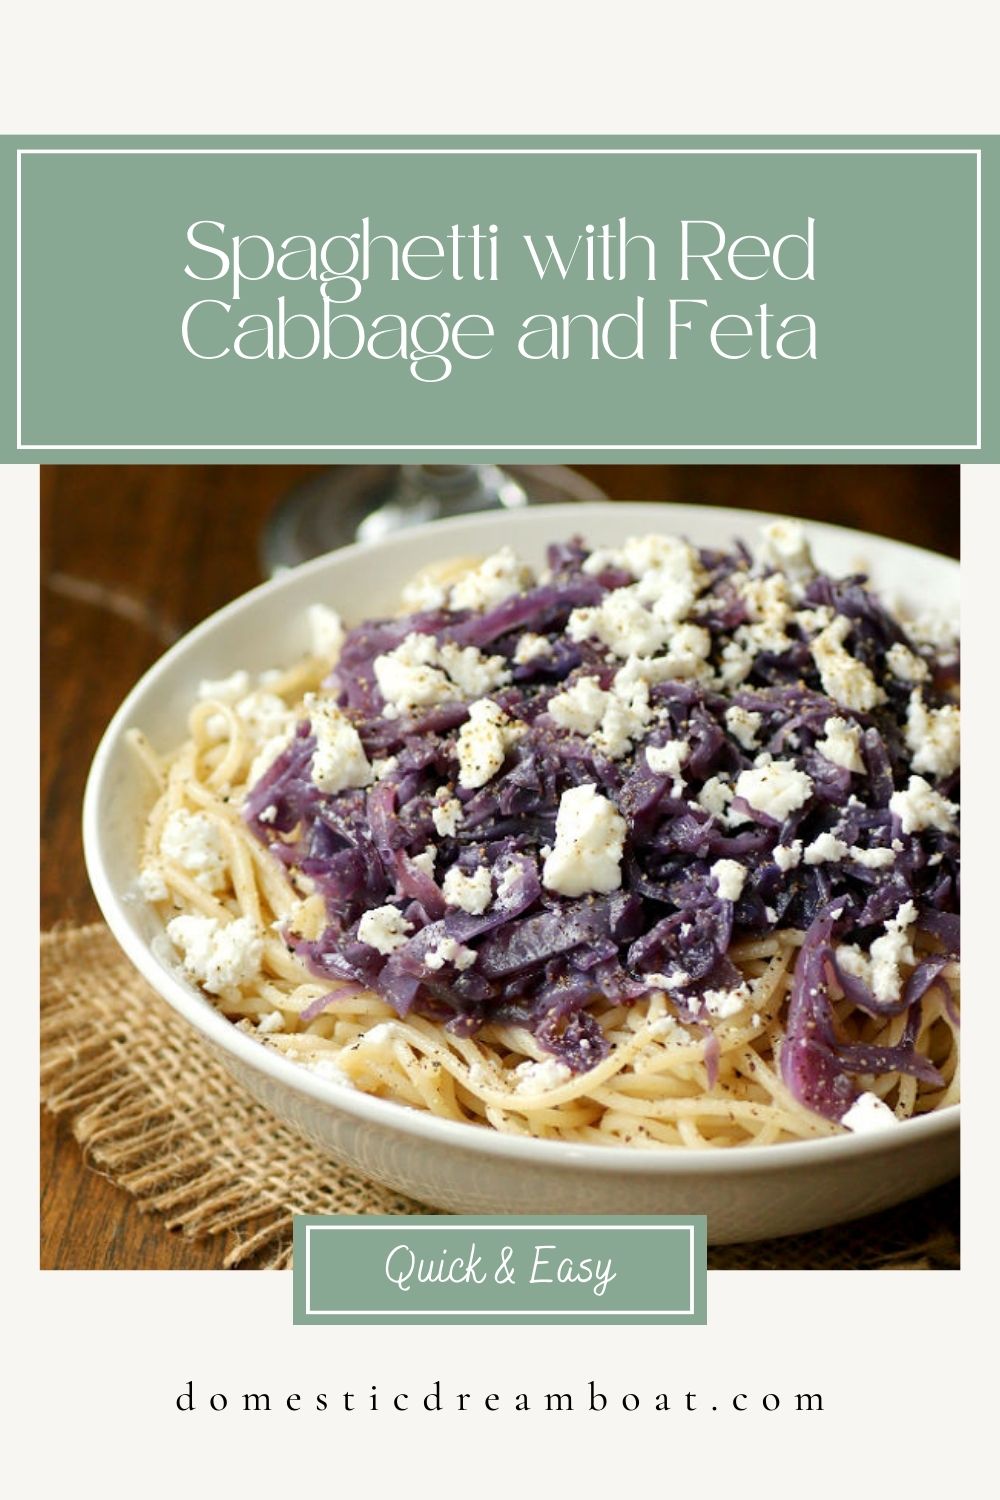 Spaghetti with Red Cabbage and Feta